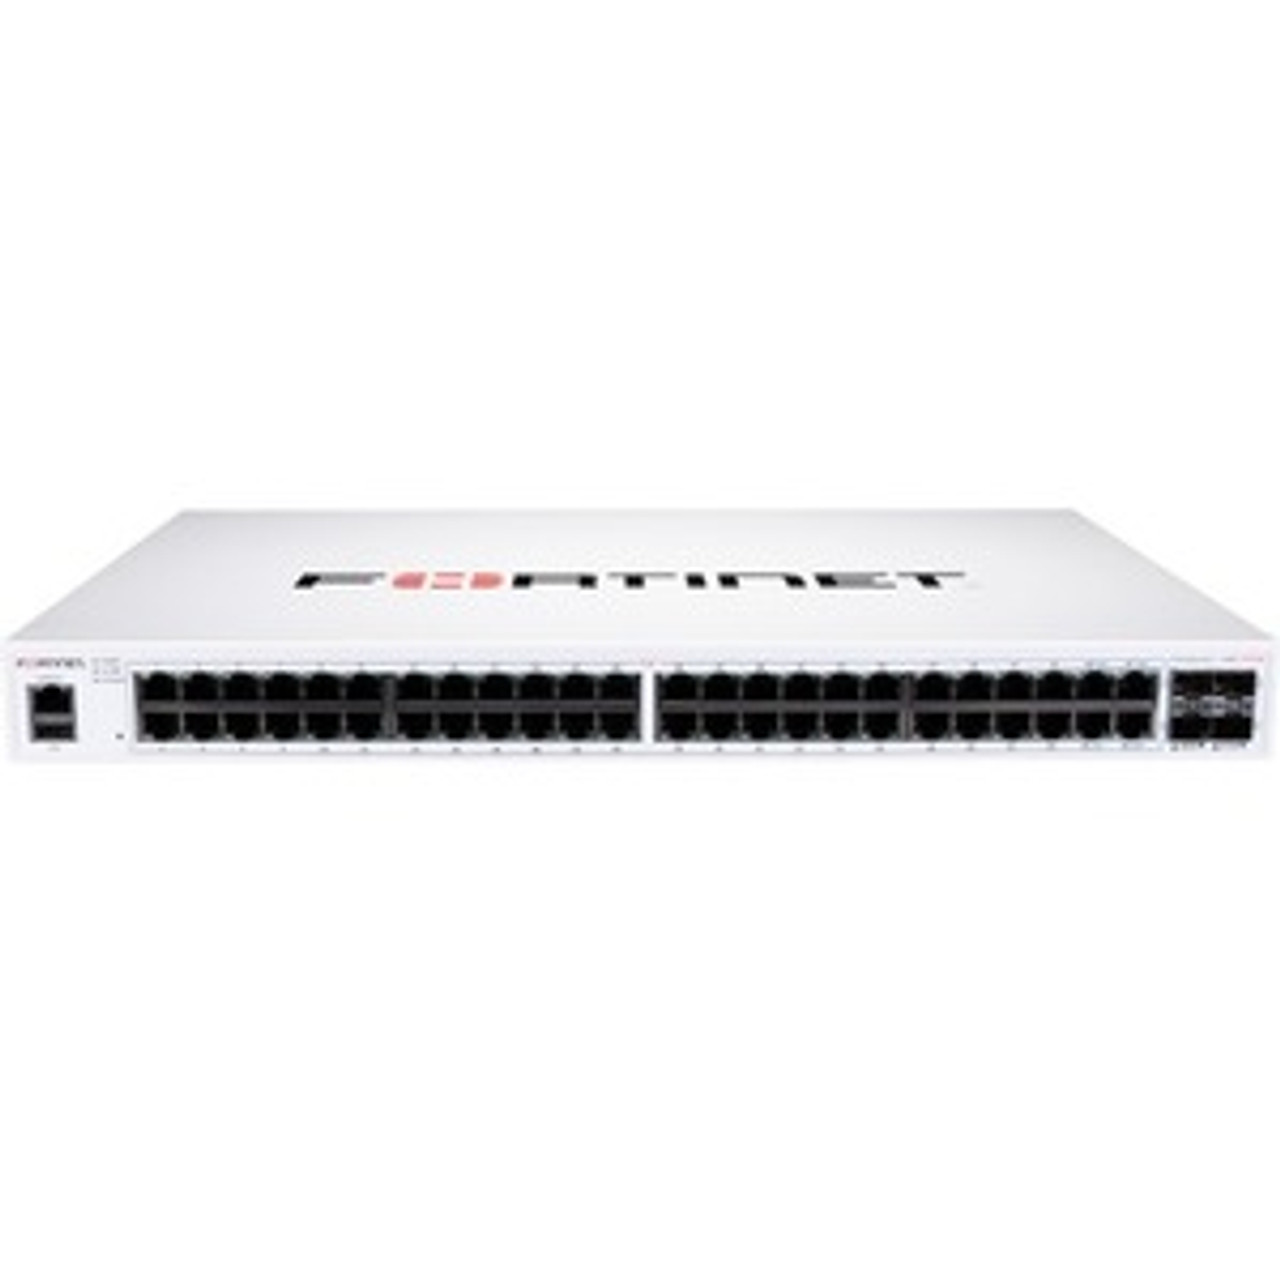 FS-148F-FPOE Fortinet FortiSwitch 148F-FPOE L2+ Management Switch with 48x Gigabit Ports + 4x SFP+ Ports + 1x RJ45 Console Port (Refurbished)